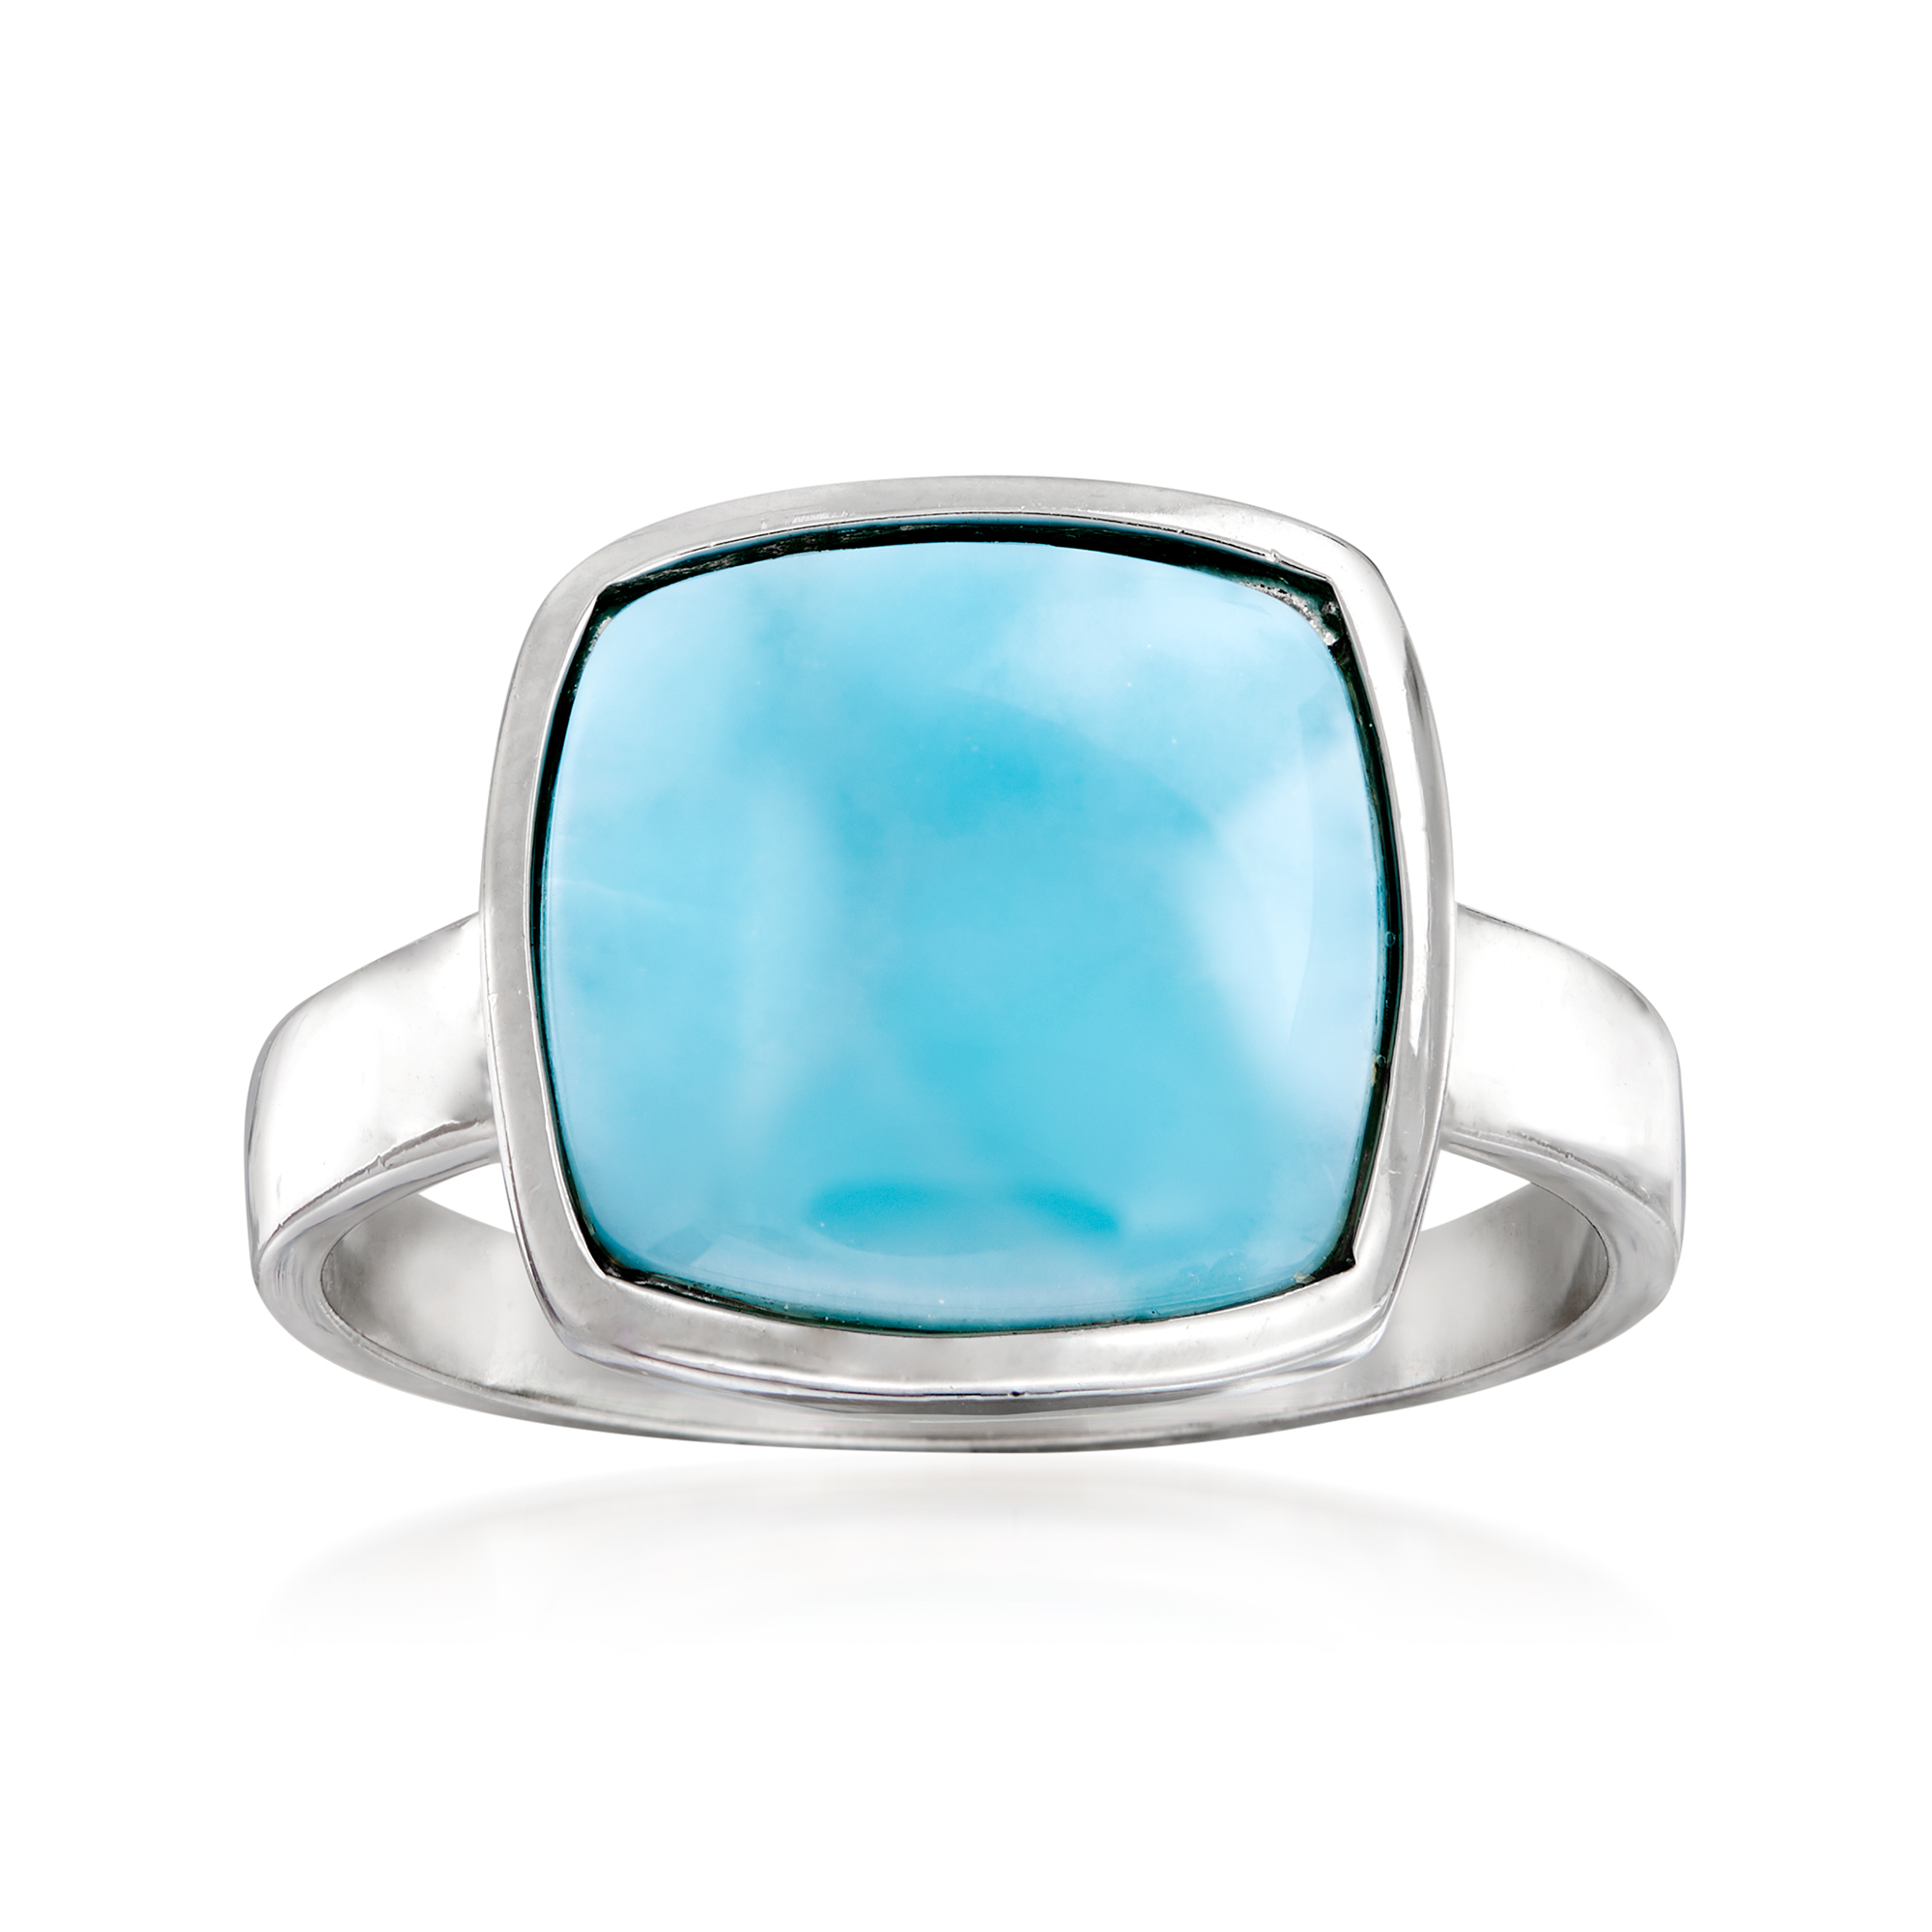 WHOLESALE 11PC 925 SOLID STERLING SILVER BLUE LARIMAR RING LOT O Q206 